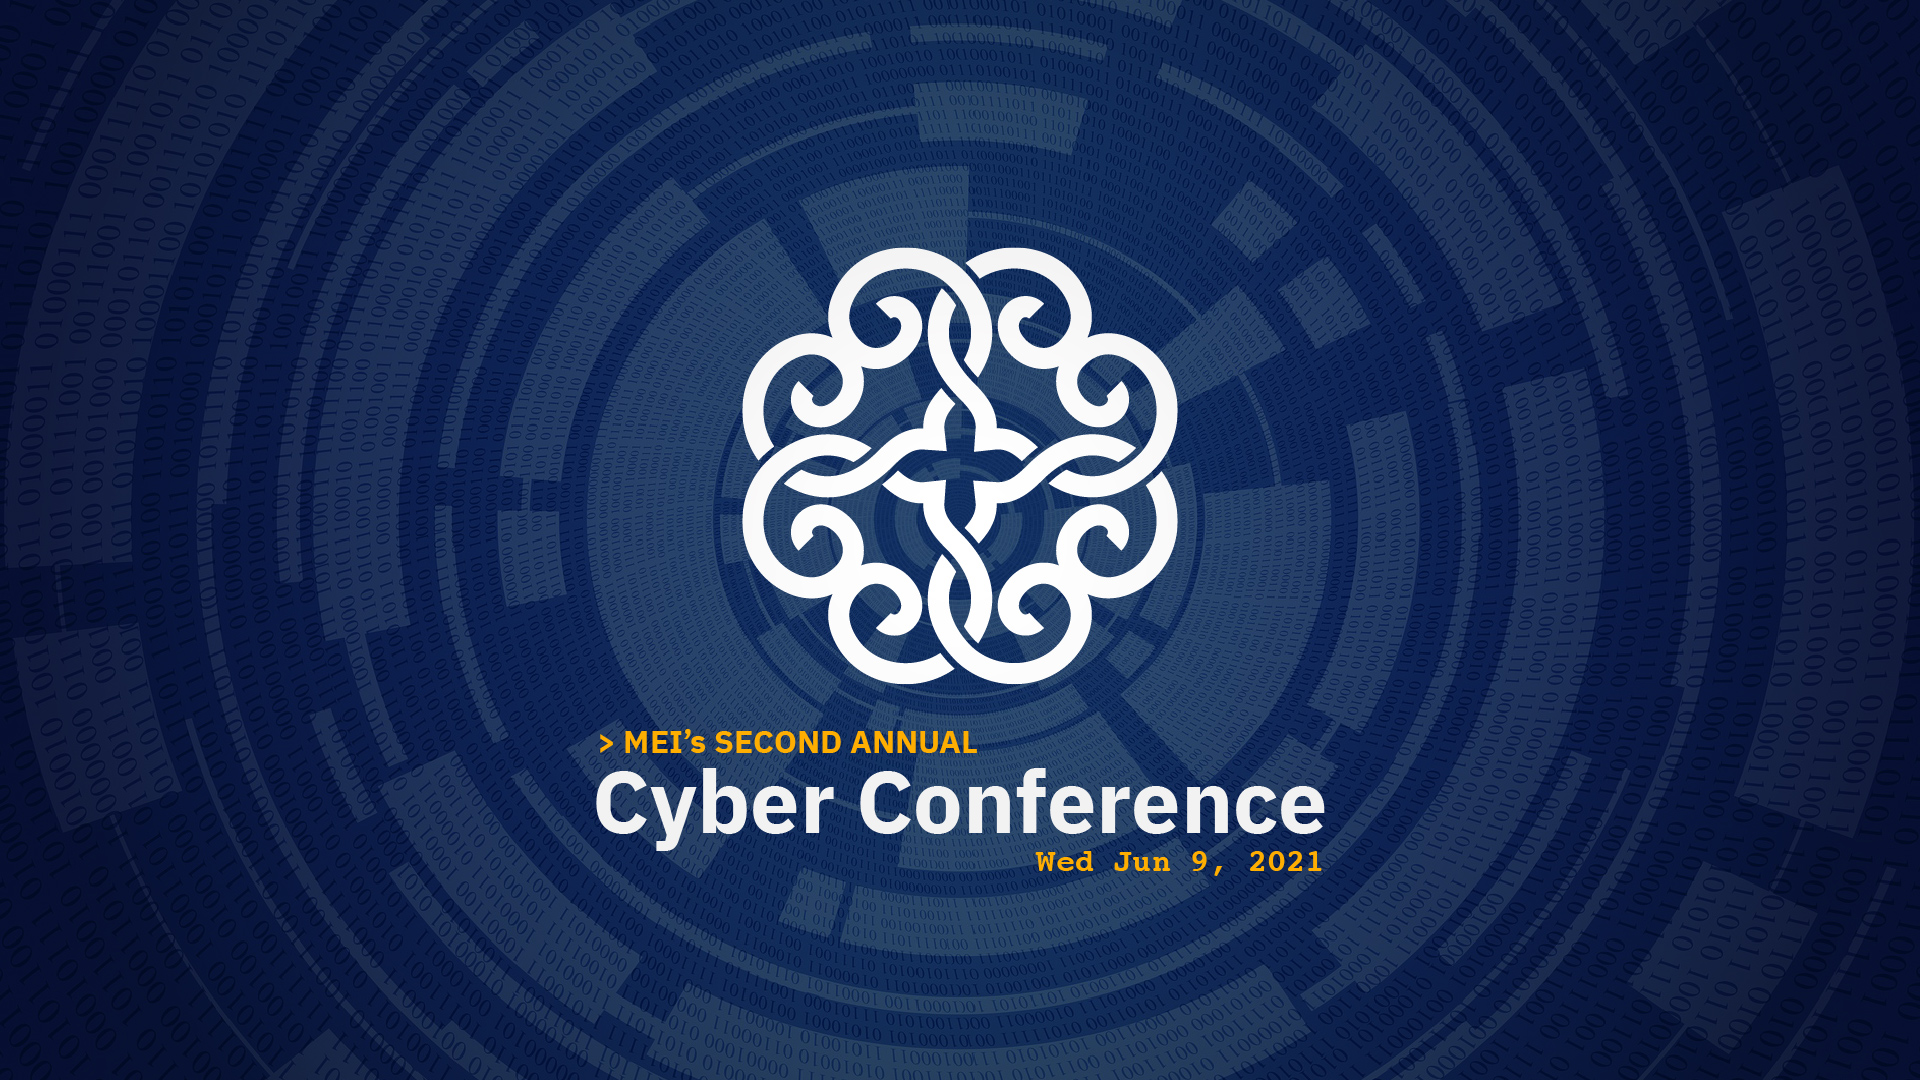 Cyber Conference